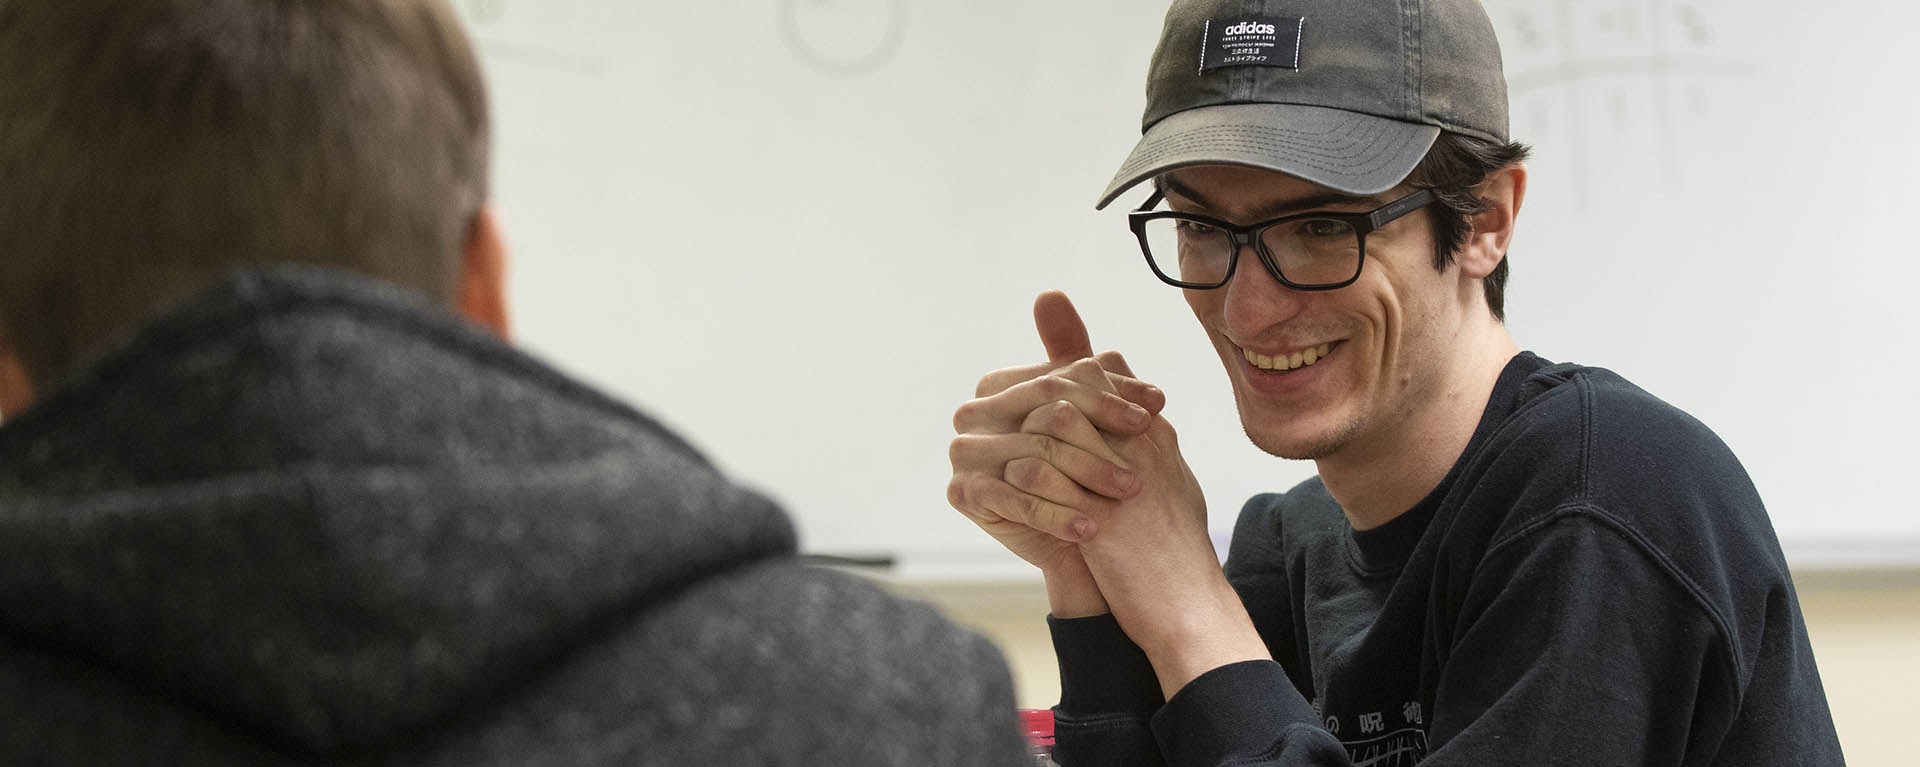 A student laughs while in a computer gaming class.